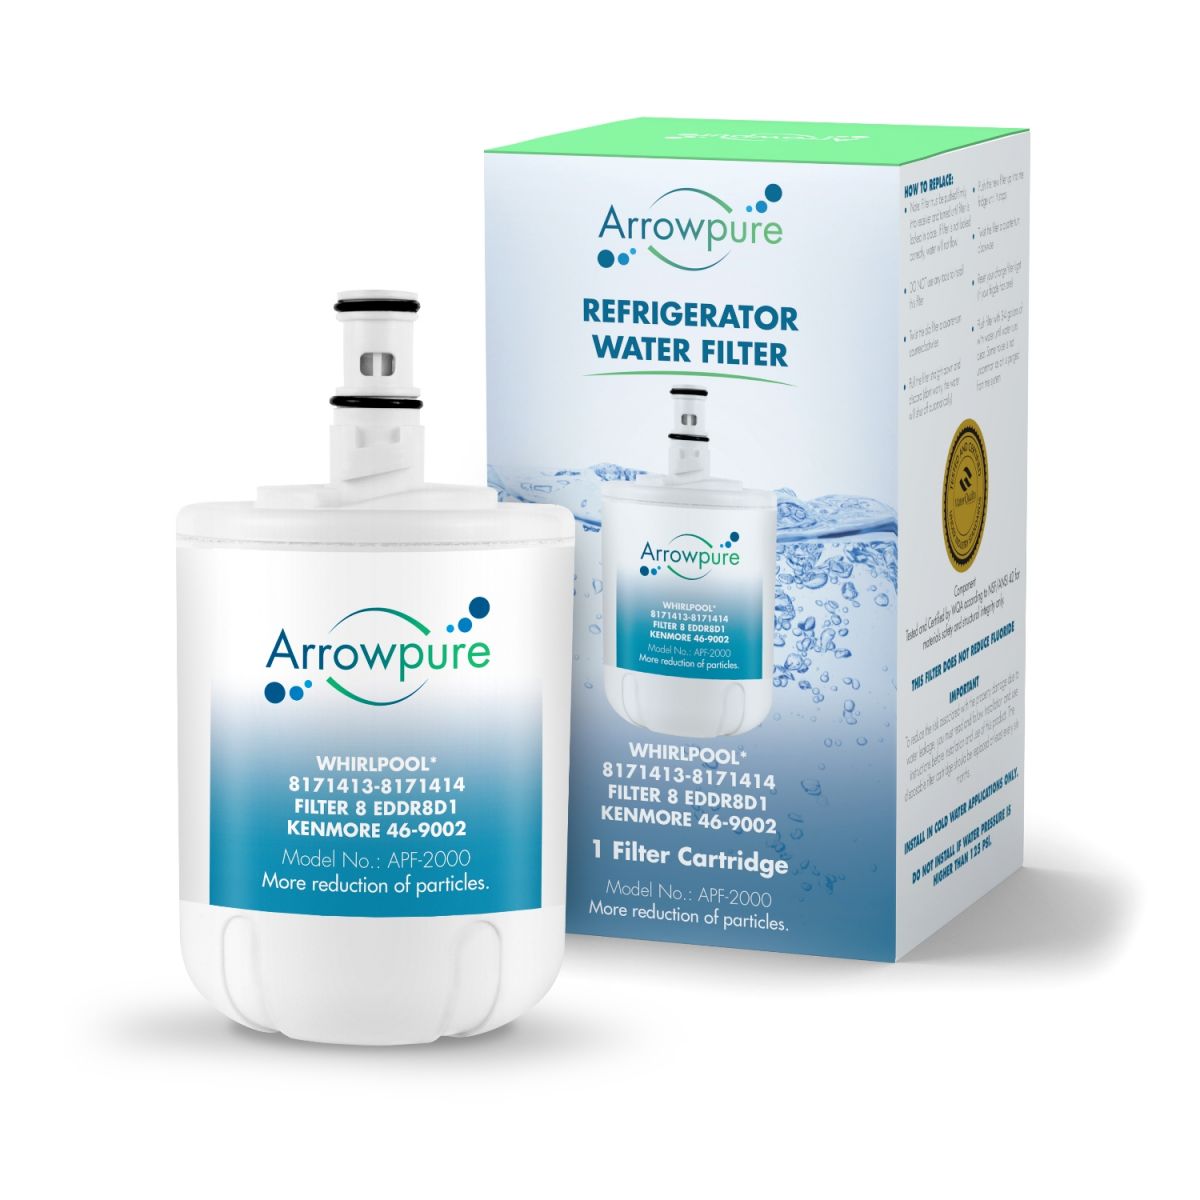 Arrowpure Refrigerator Water Filter Replacement APF-2000